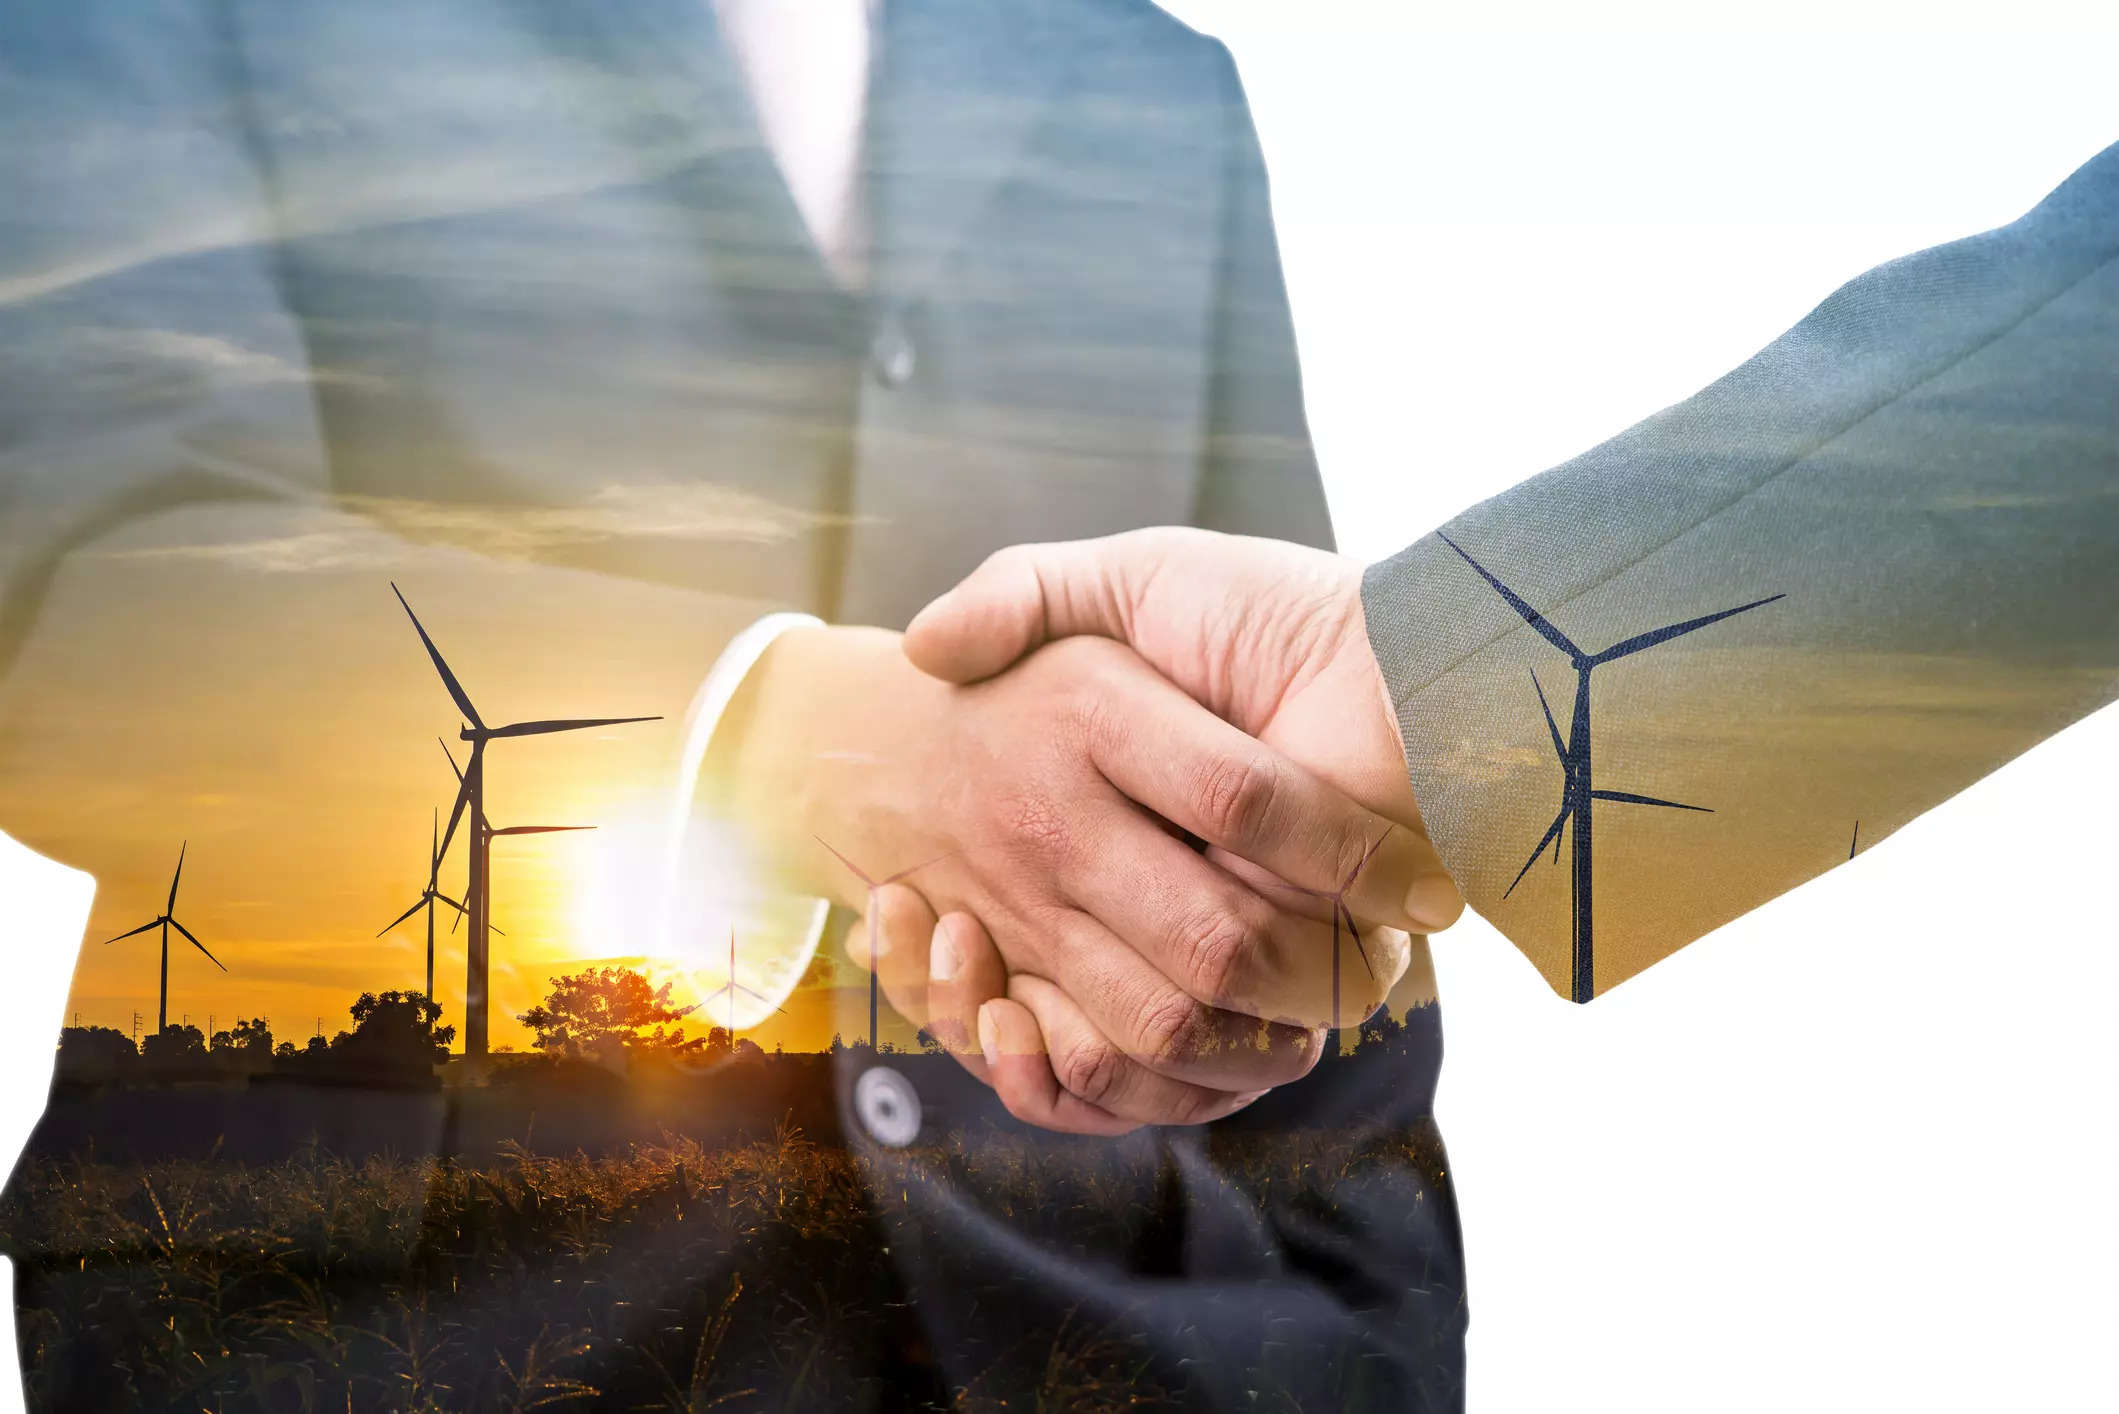 The Ministry of External Affairs (MEA) said the panel agreed on a detailed work programme until 2023 to implement clean energy and climate partnership that was agreed in 2016